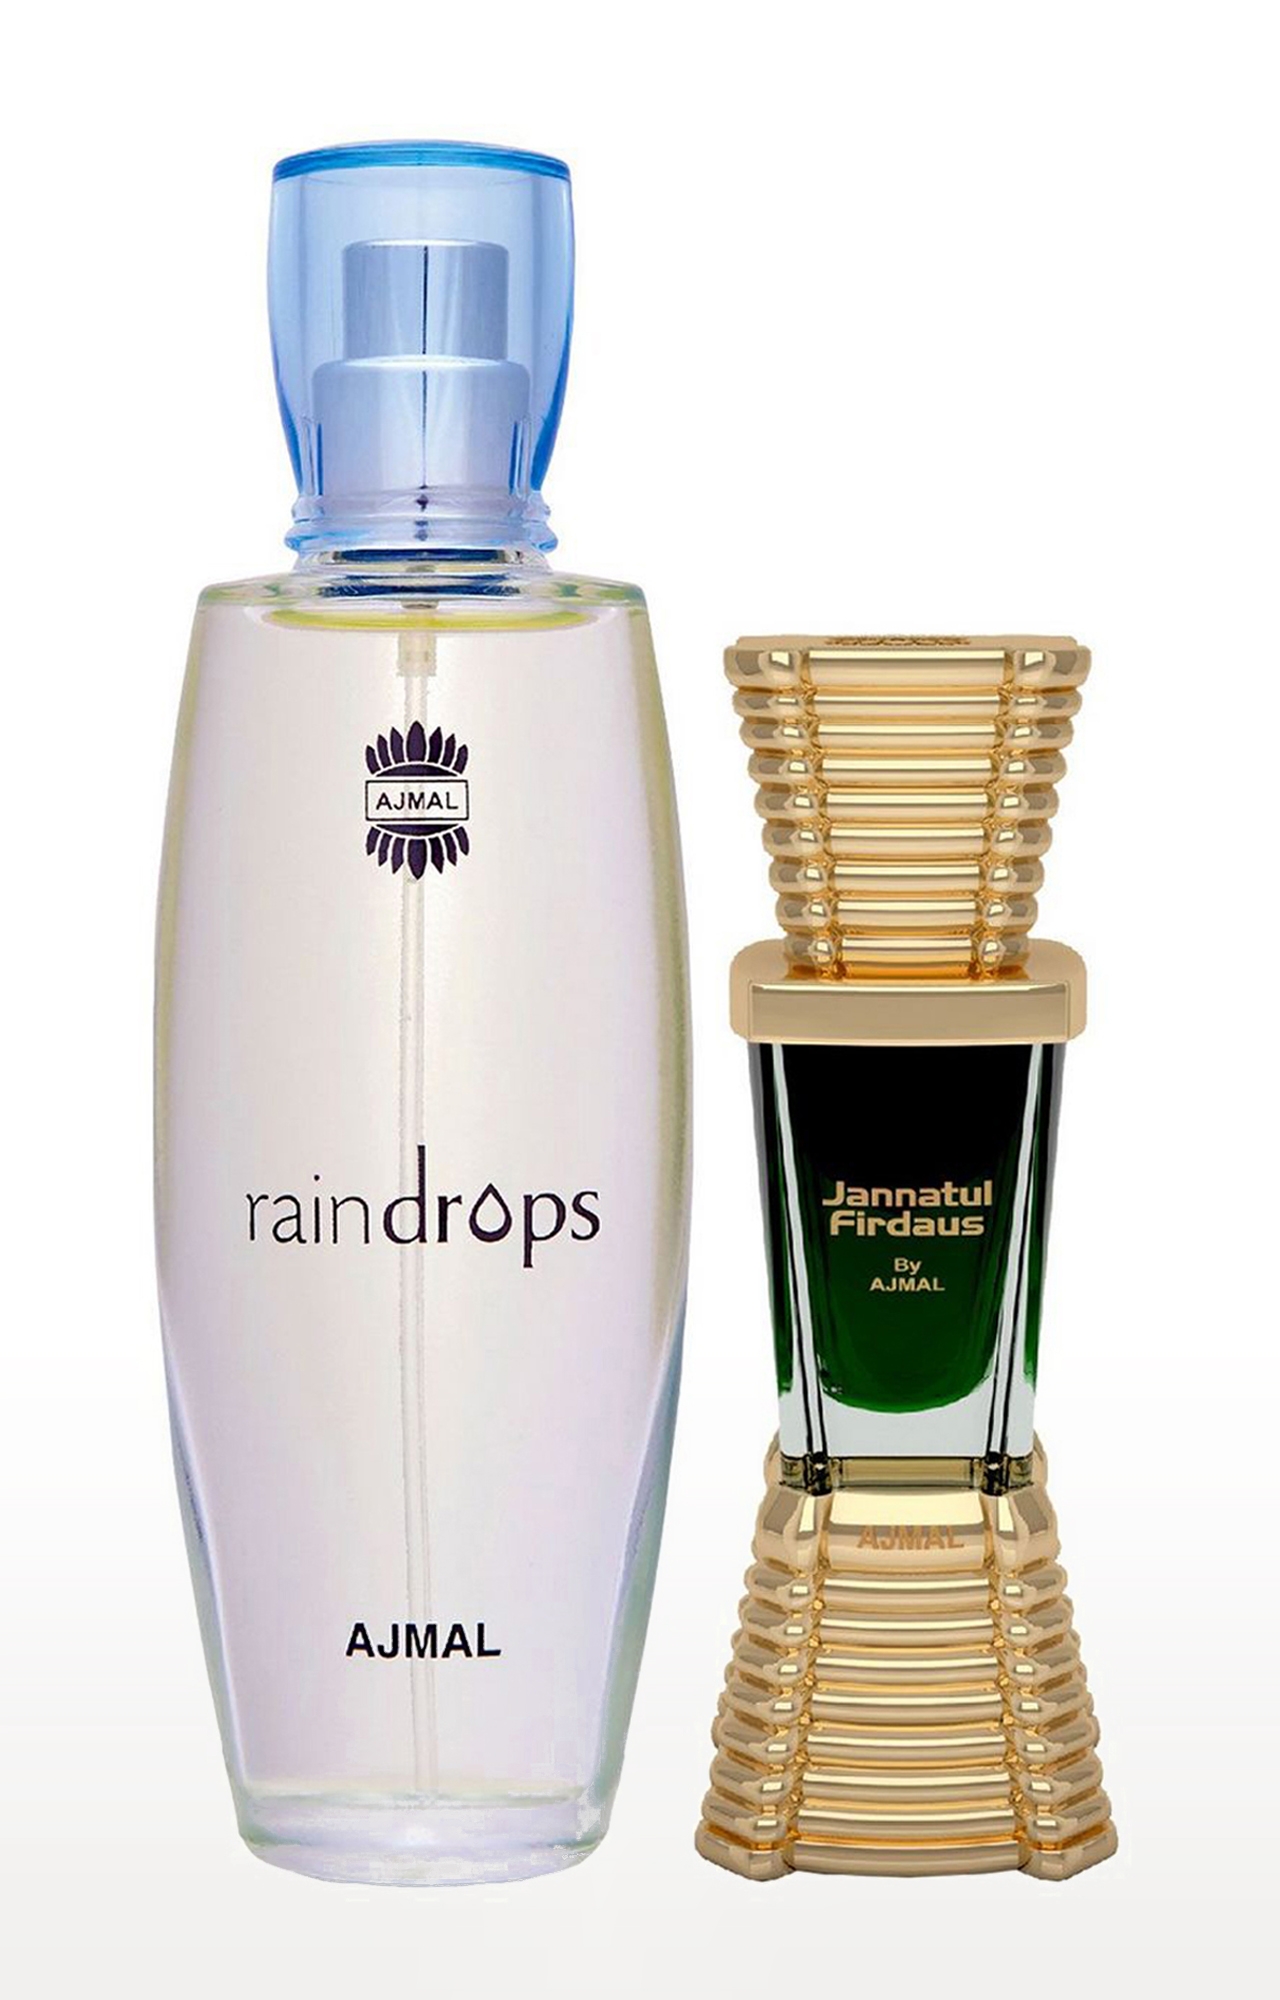 Ajmal Raindrops EDP Perfume 50ml for Women and Jannatul Firdaus Concentrated Perfume Oil Oriental Alcohol-free Attar 10ml for Unisex